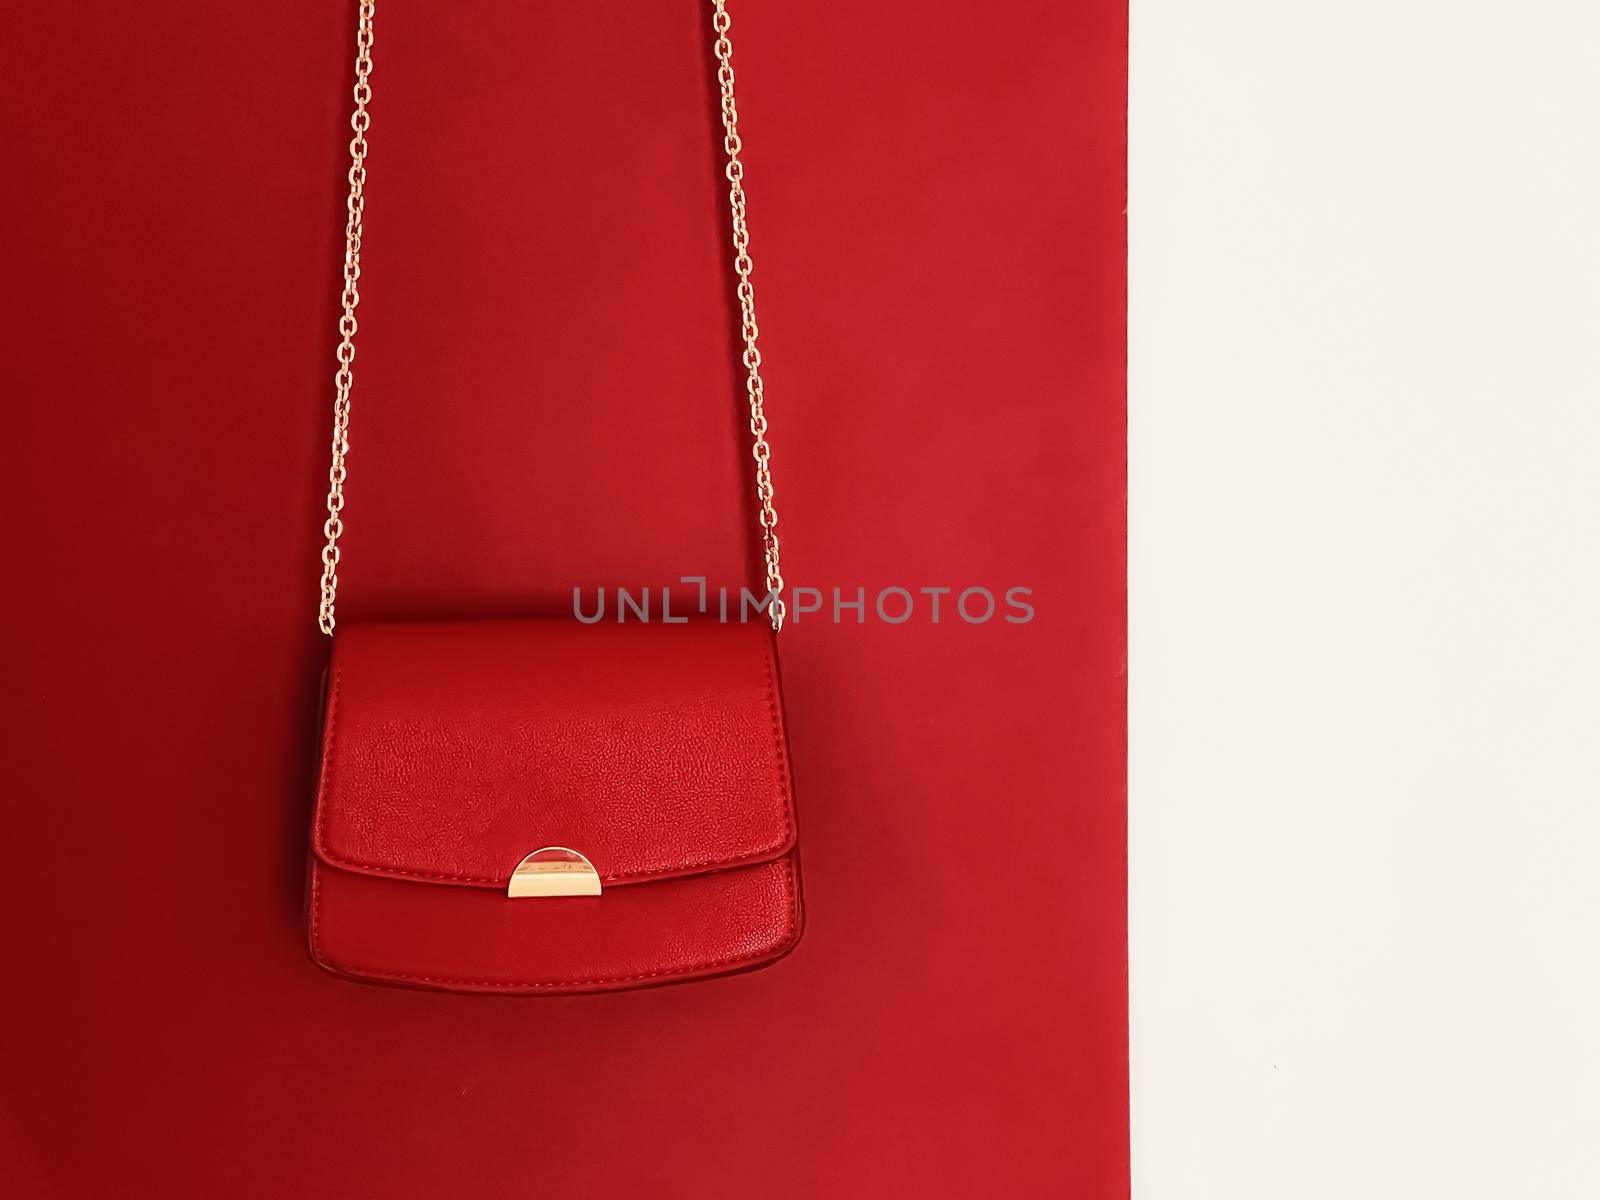 Red fashionable leather purse with gold details as designer bag and stylish accessory, female fashion and luxury style handbag collection by Anneleven